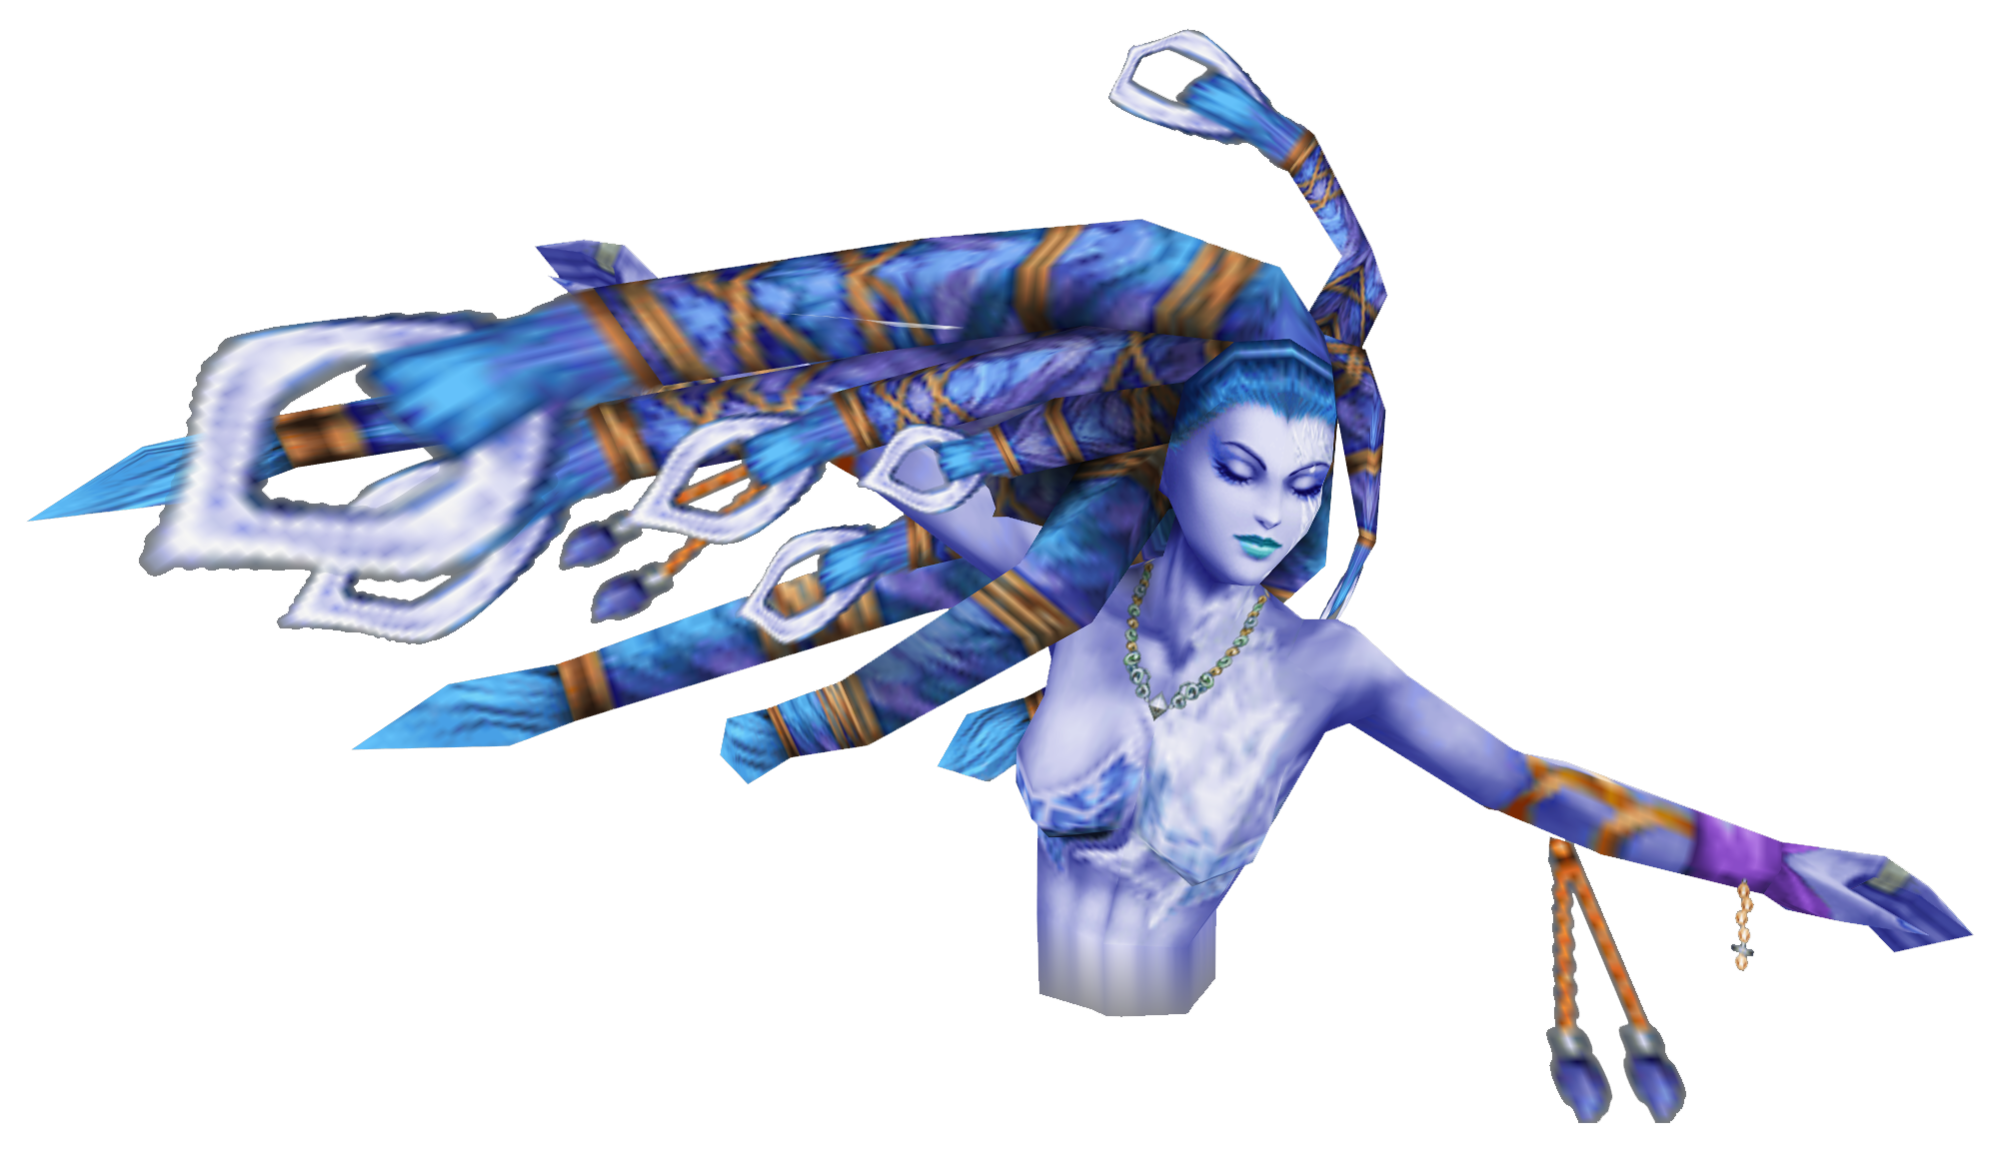 Lord Shiva PNG Image in Transparent pngteam.com